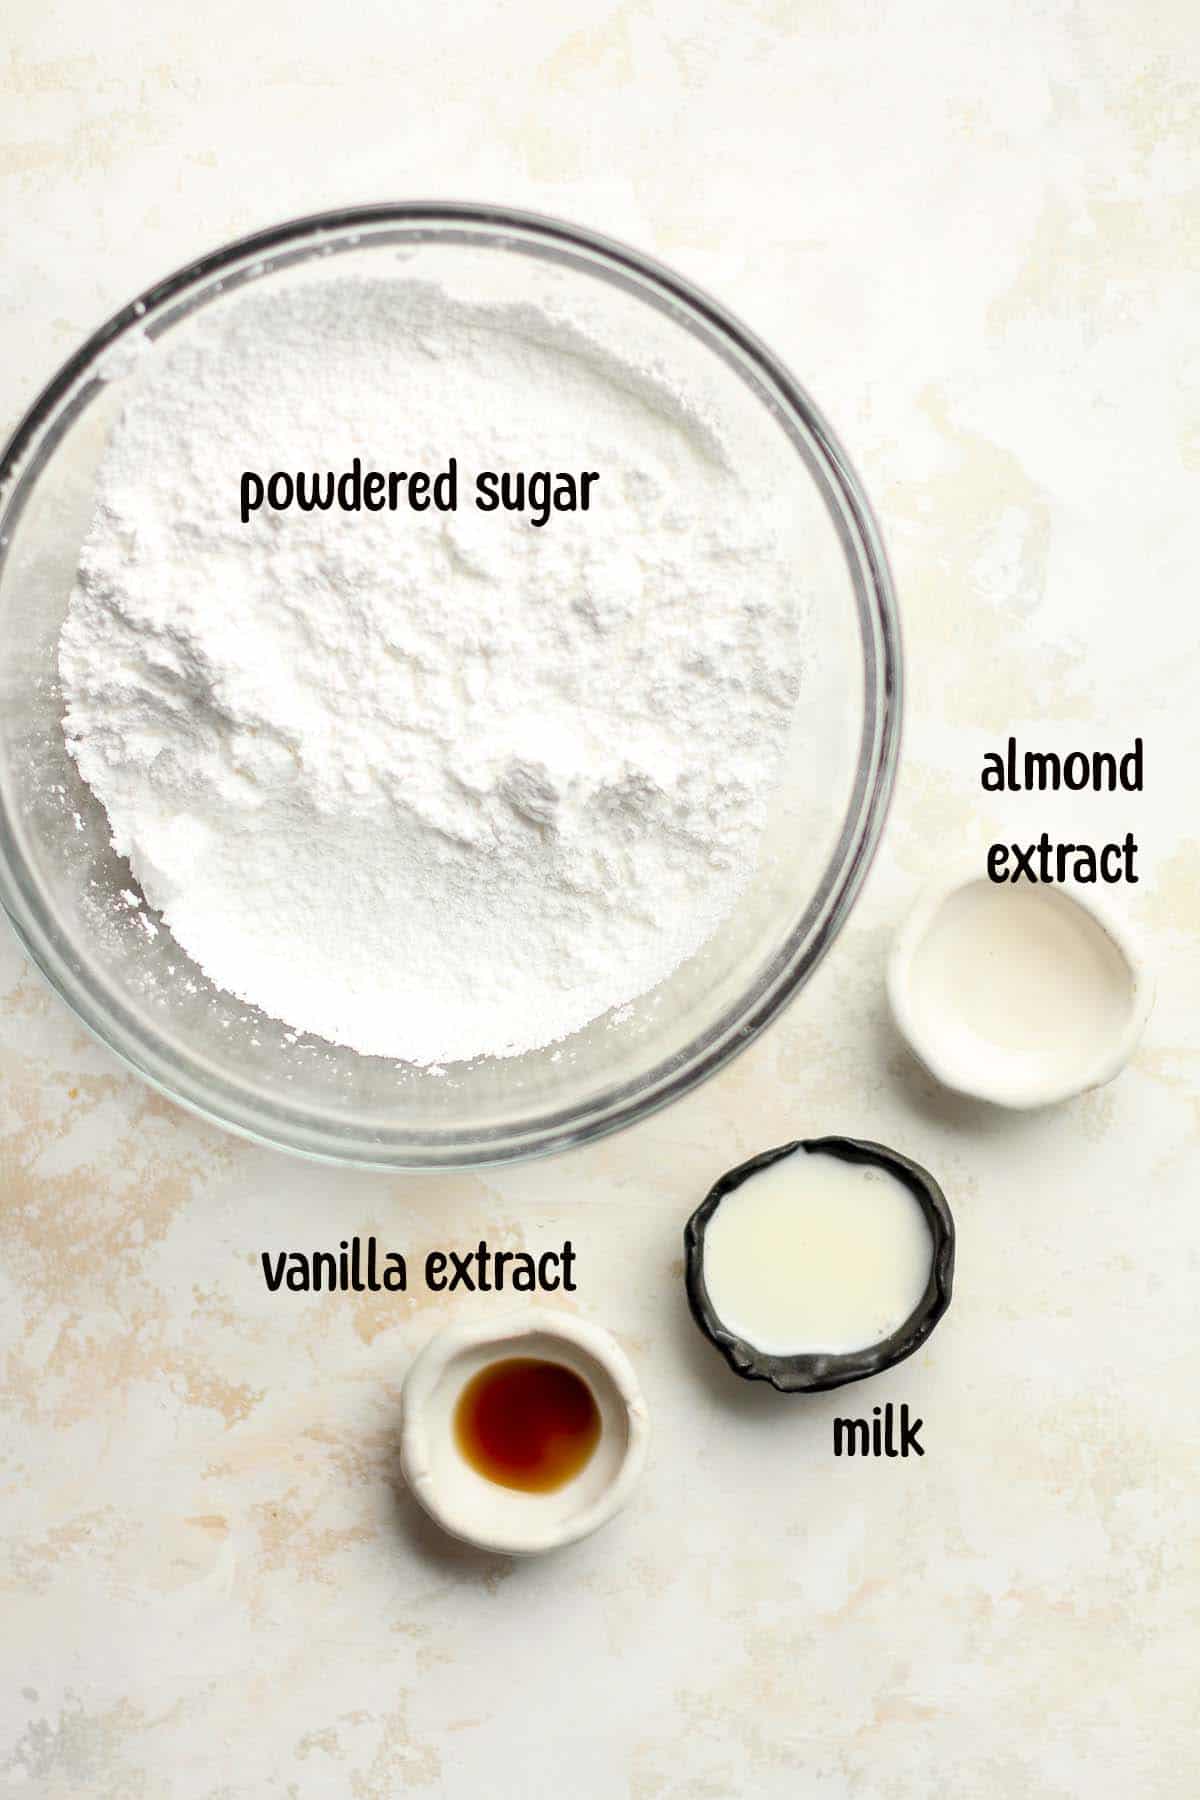 Labeled ingredients for the icing.